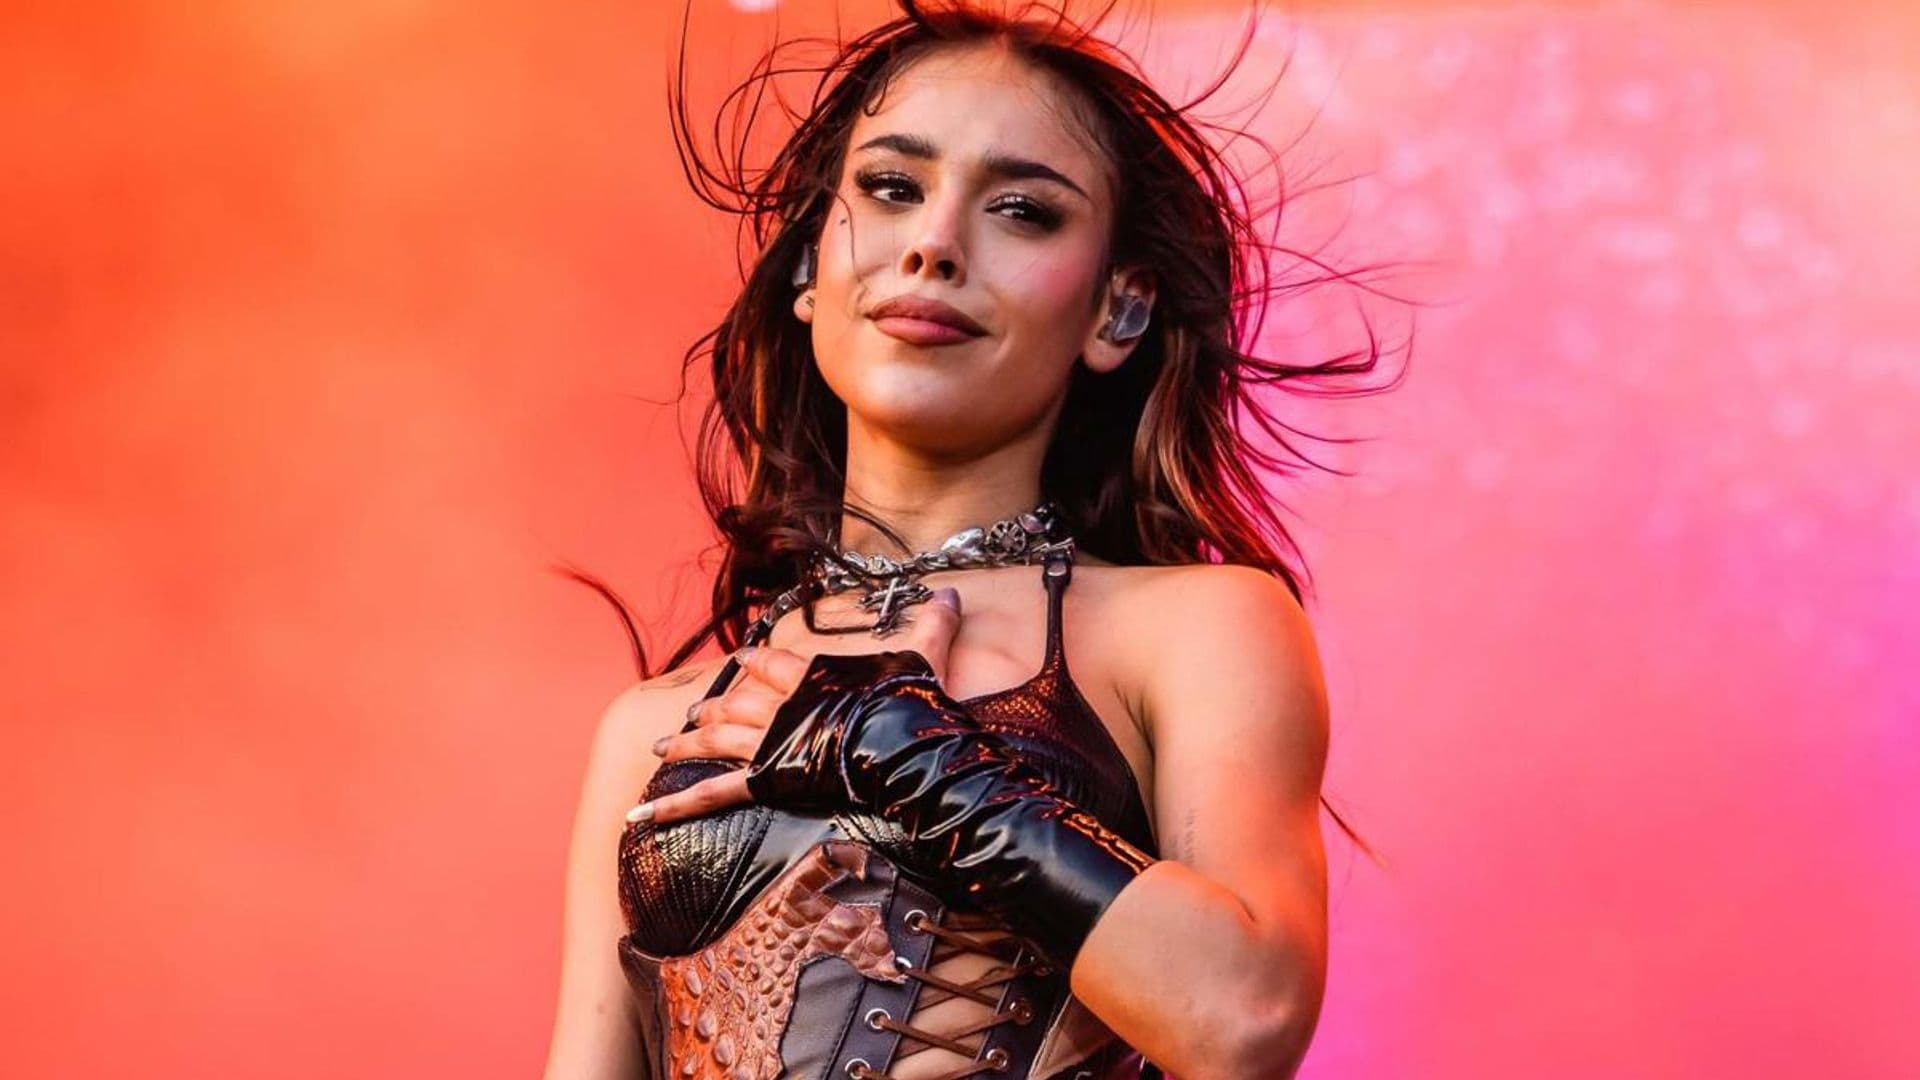 Danna Paola gets emotional in her concert: ‘I’ve been very toxic with myself’